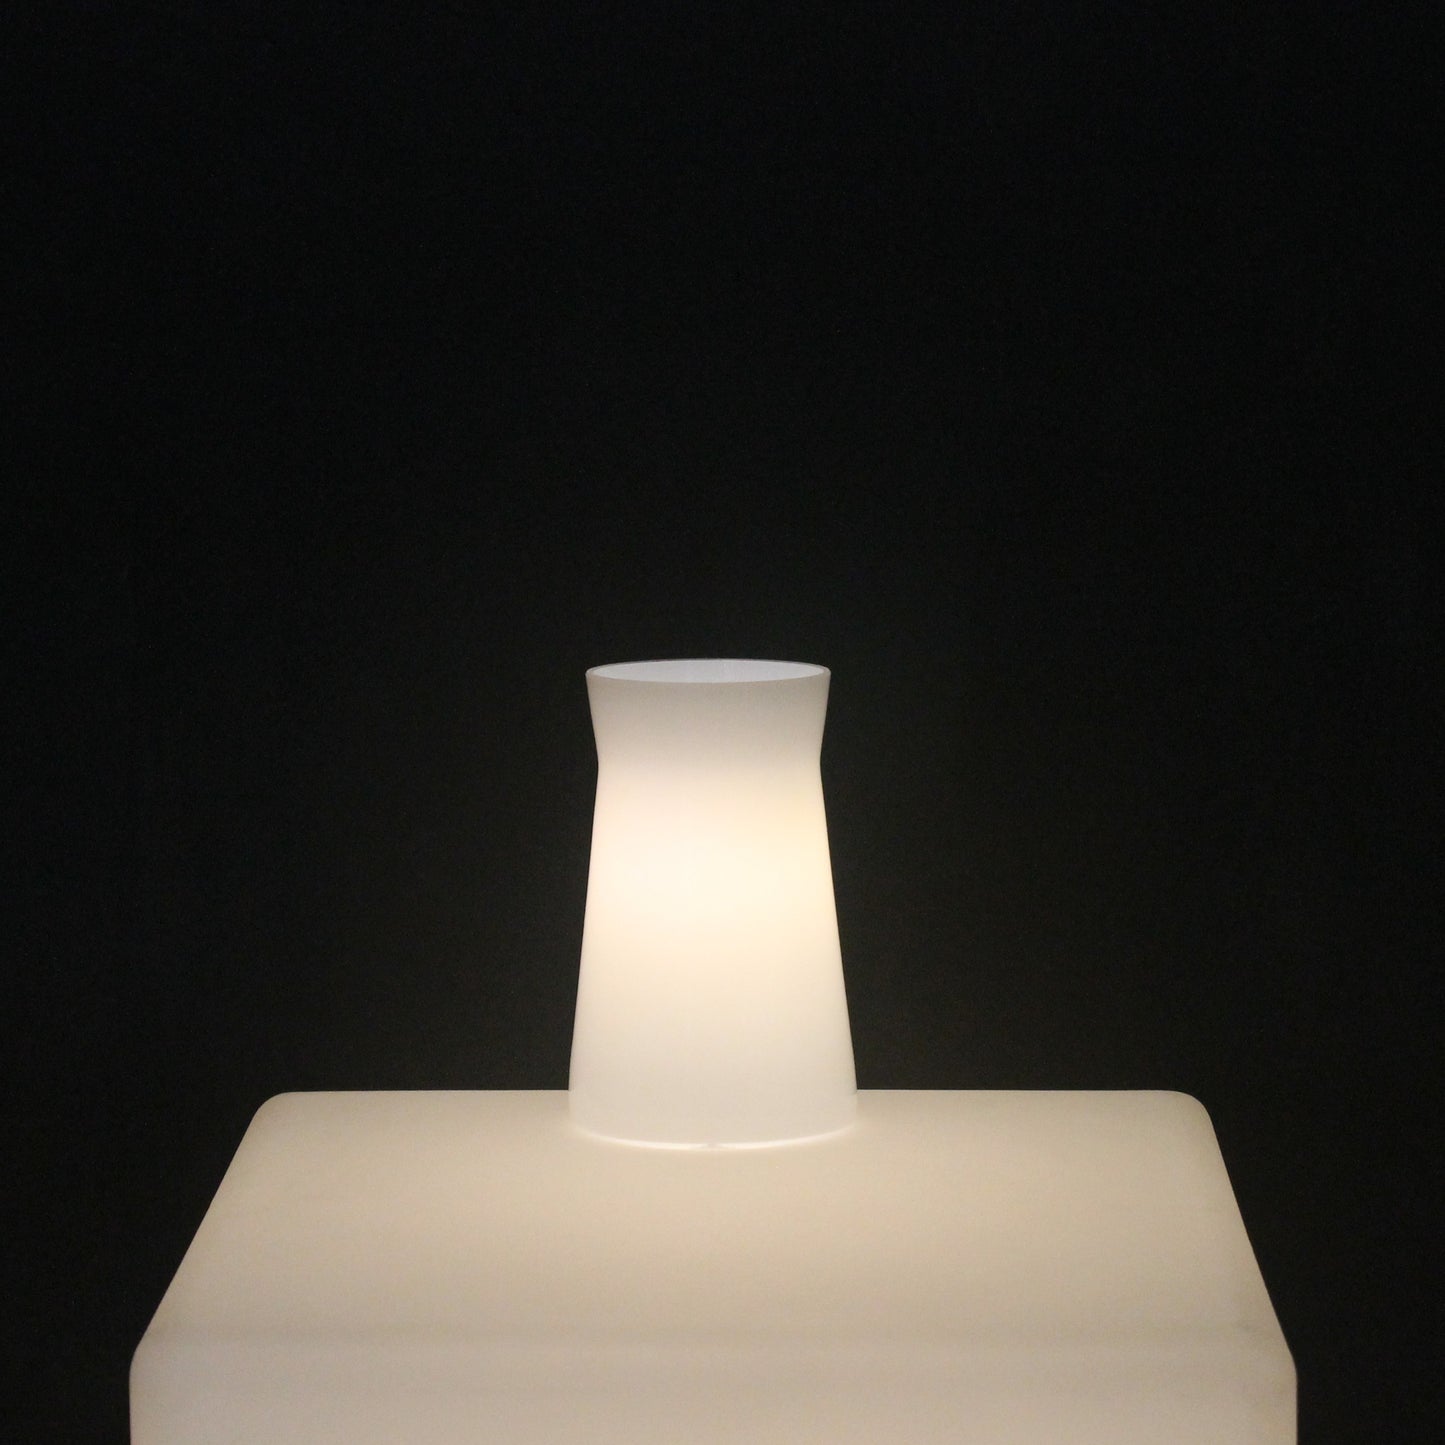 Waisted Table Lamp. Simple elegant table lighting. White glass lamp. Hand made in UK